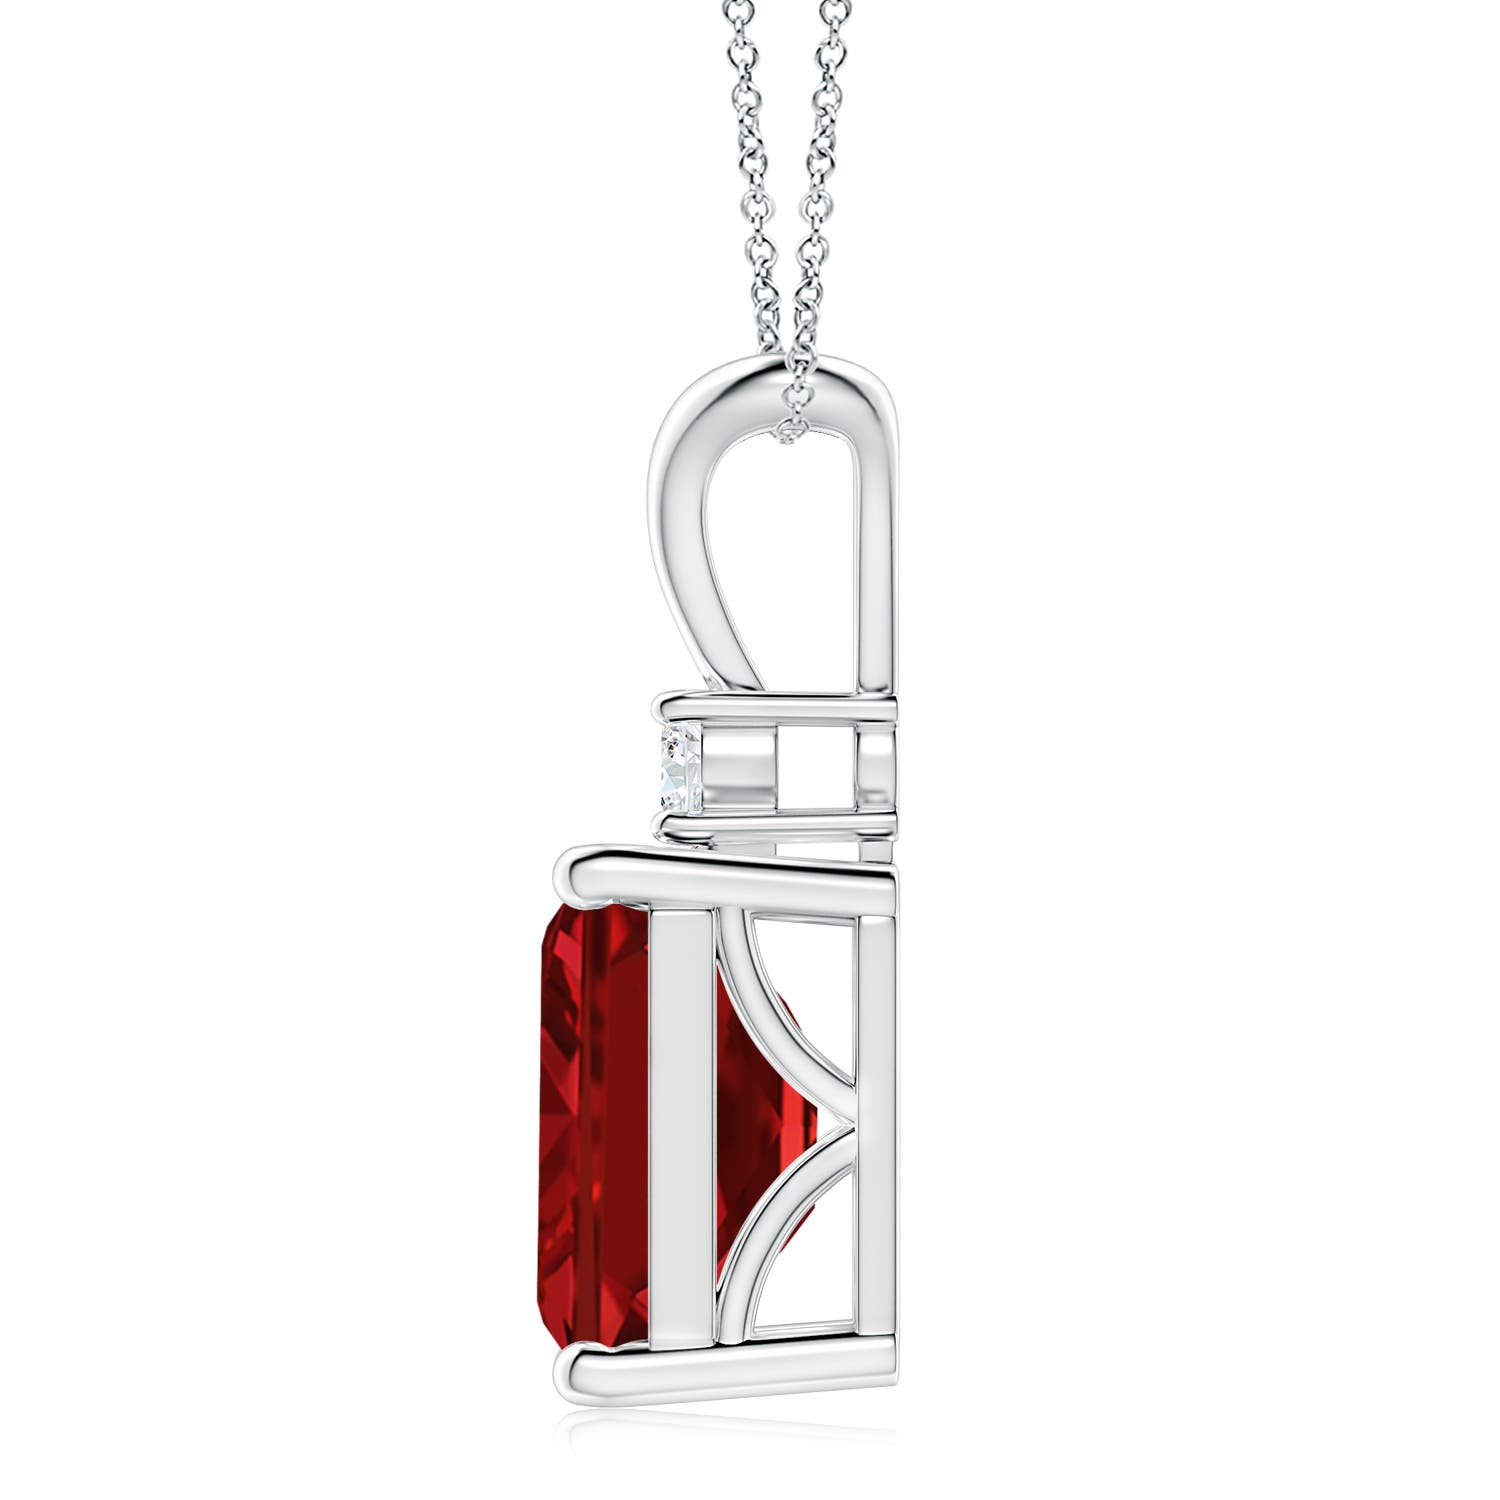 AAAA - Ruby / 6.41 CT / 14 KT White Gold